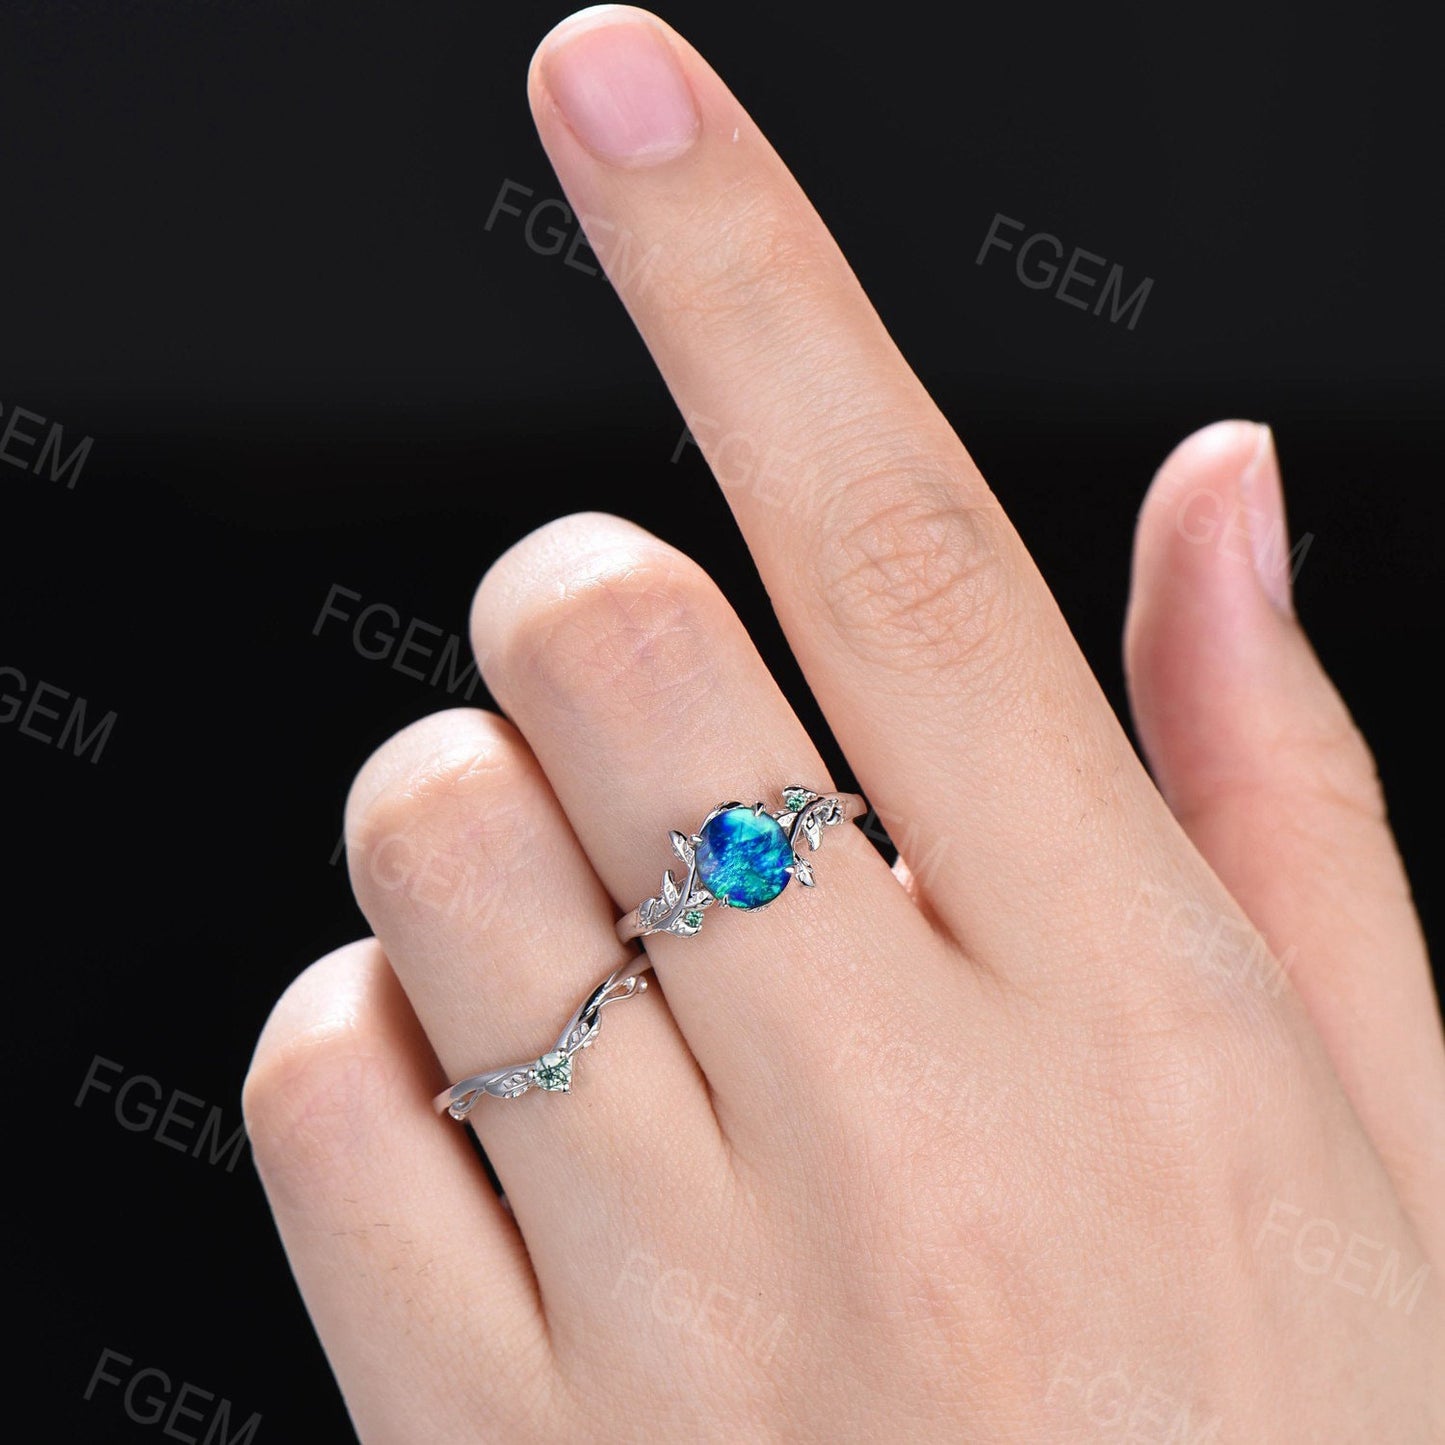 10K White Gold 1ct Round Cut Leaf Blue Fire Opal Emerald Engagement Ring Set Moss Agate Wedding Ring Twig Nature Inspired Opal Promise Ring